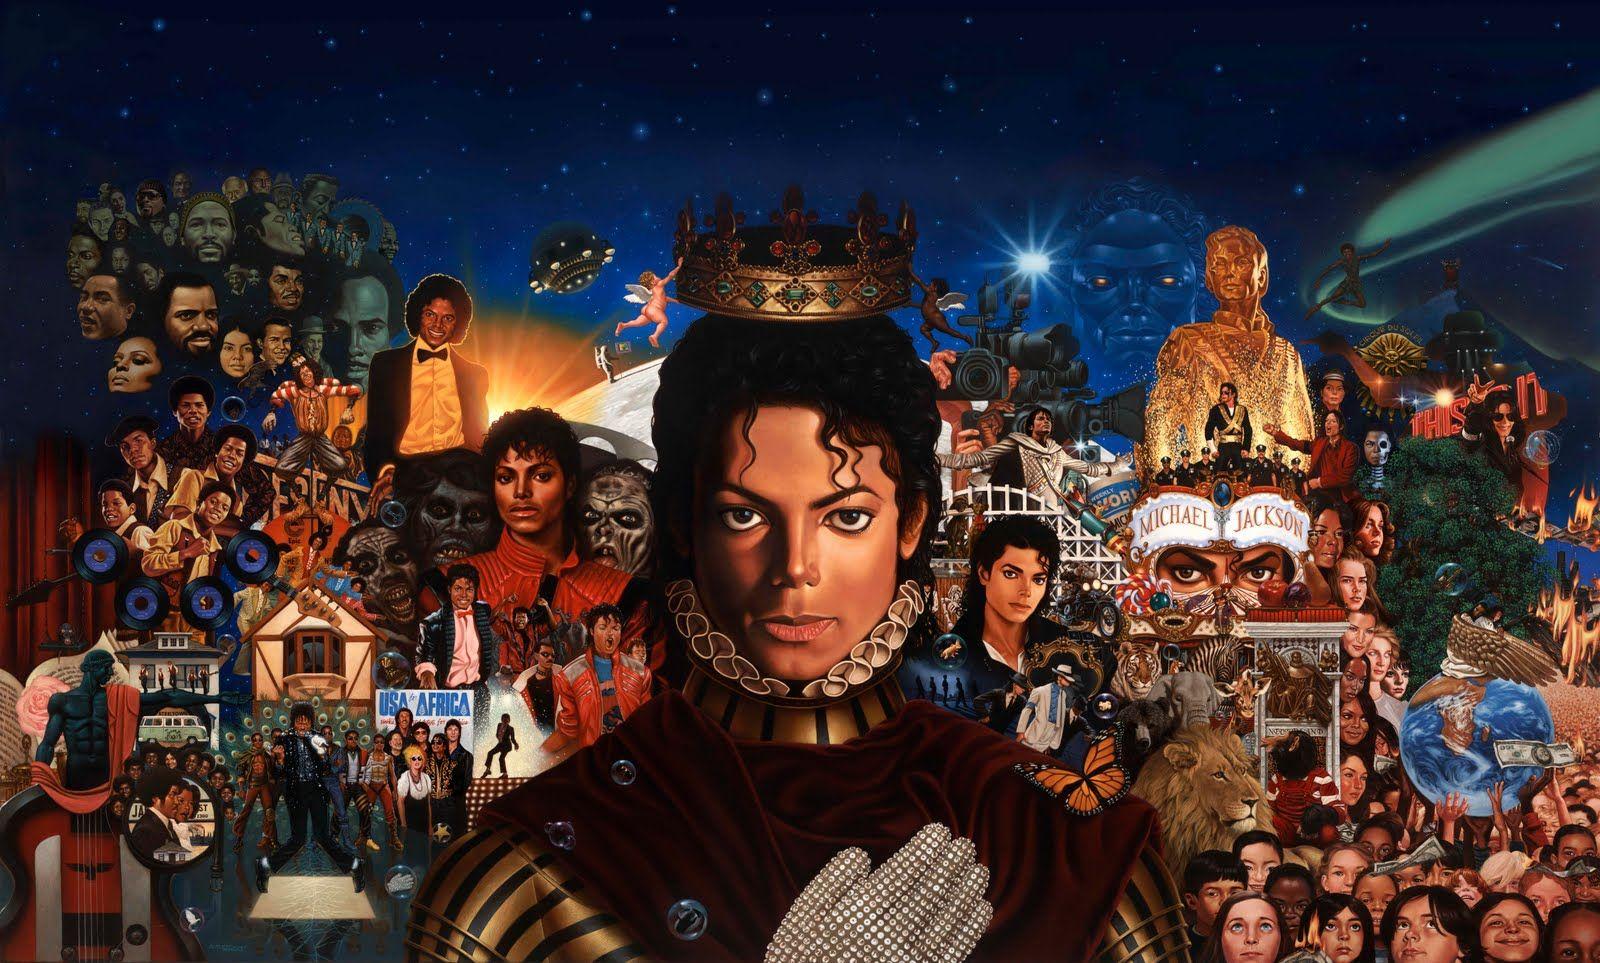 Michael the album image all mj's albums in one picture HD wallpaper